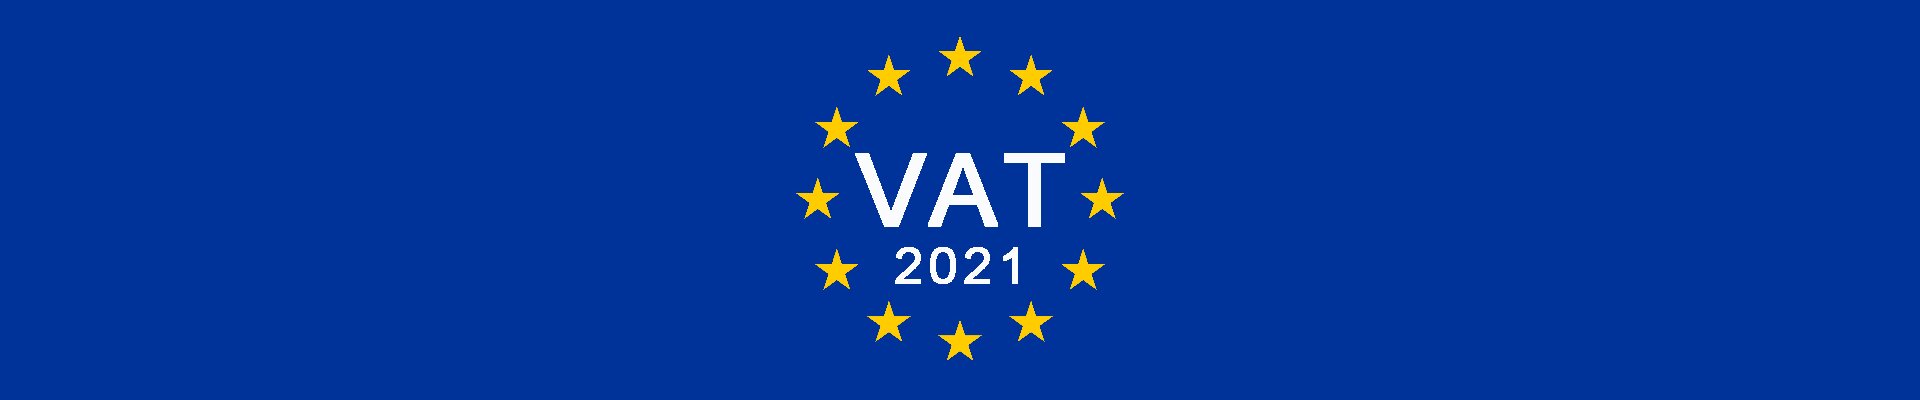 New 2021 EU VAT rules and your eBusiness - What you need to know